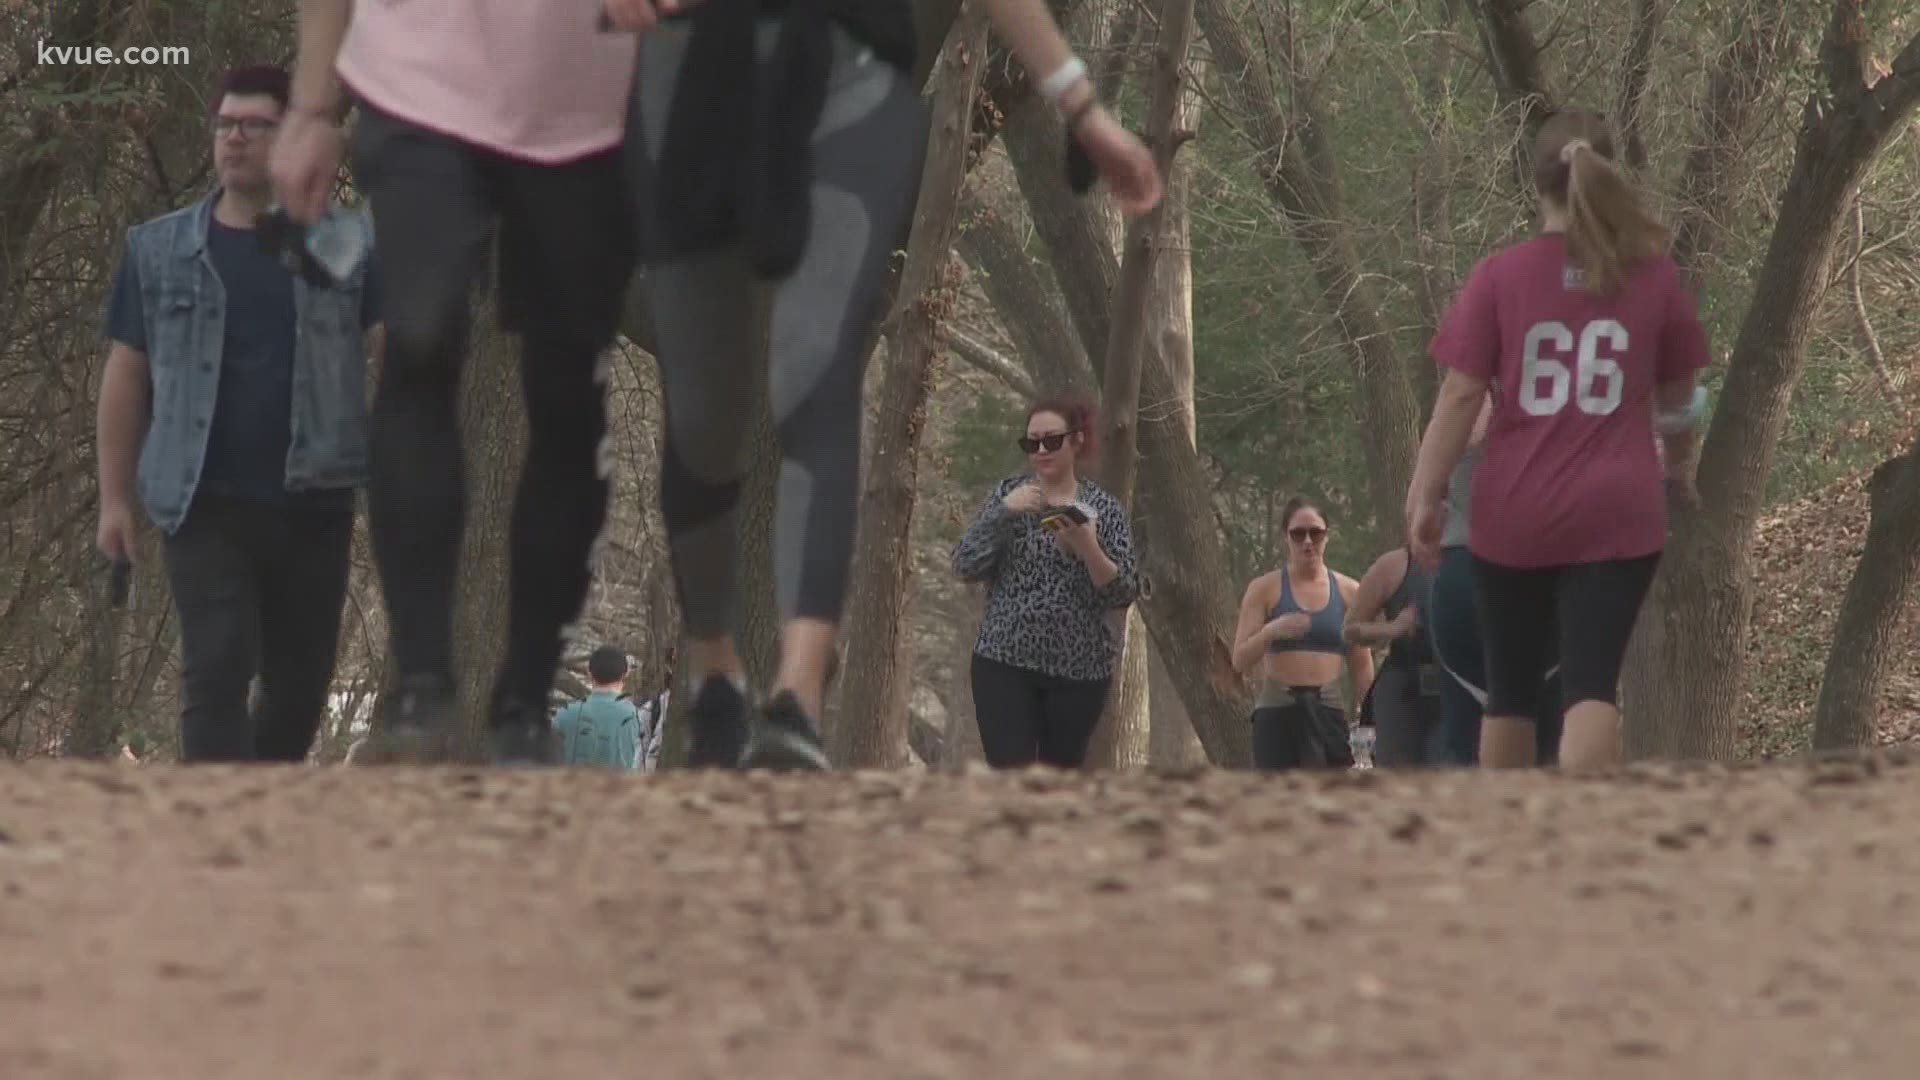 The City of Austin's hike-and-bike trail might be getting a makeover.